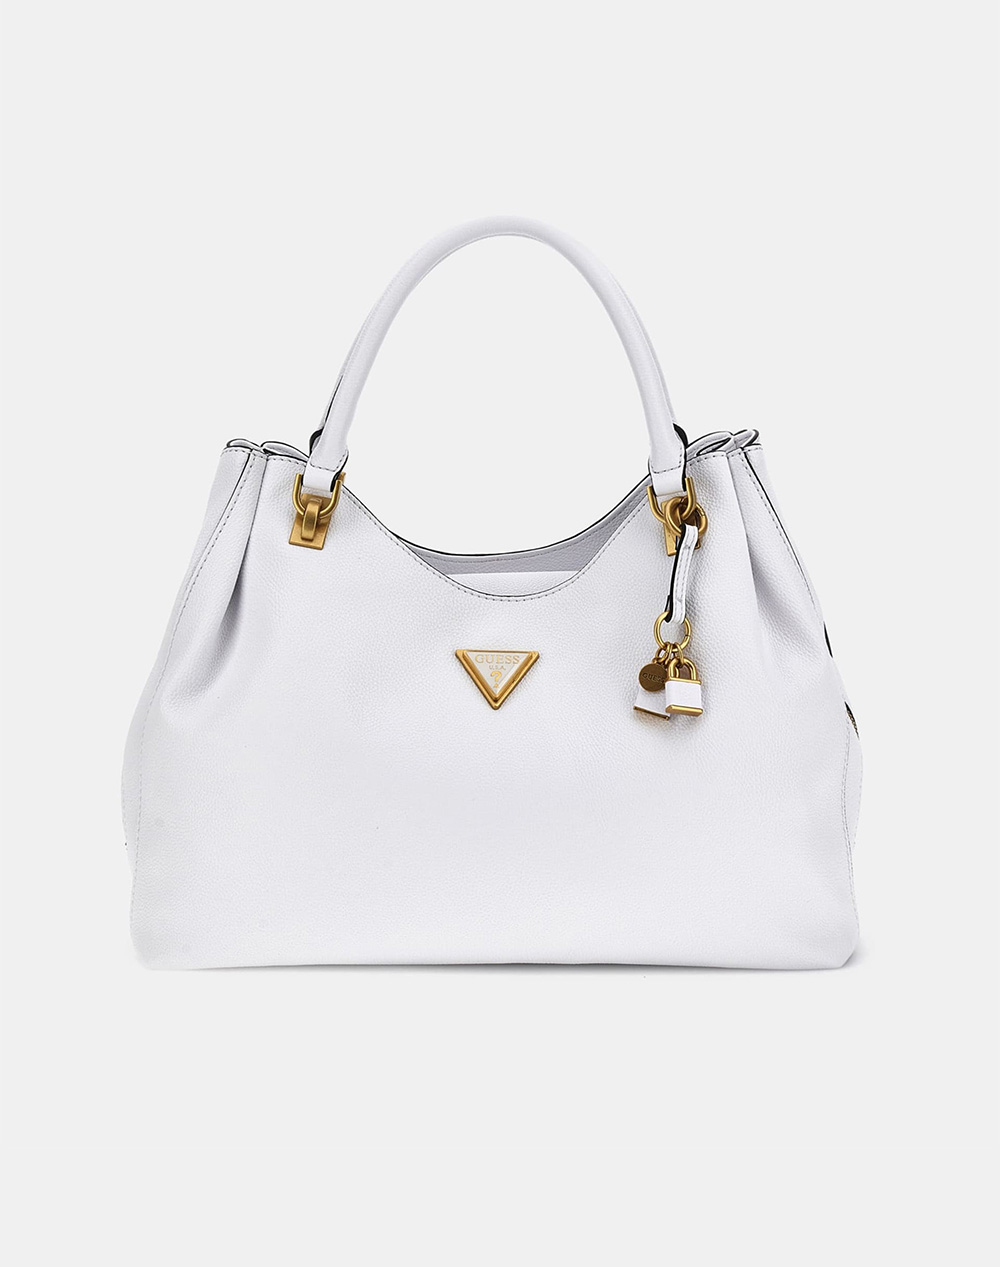 GUESS COSETTE GIRLFRIEND CARRYALL ΤΣΑΝΤΑ ΓΥΝΑΙΚΕΙΟ HWVA9222230-WHI White